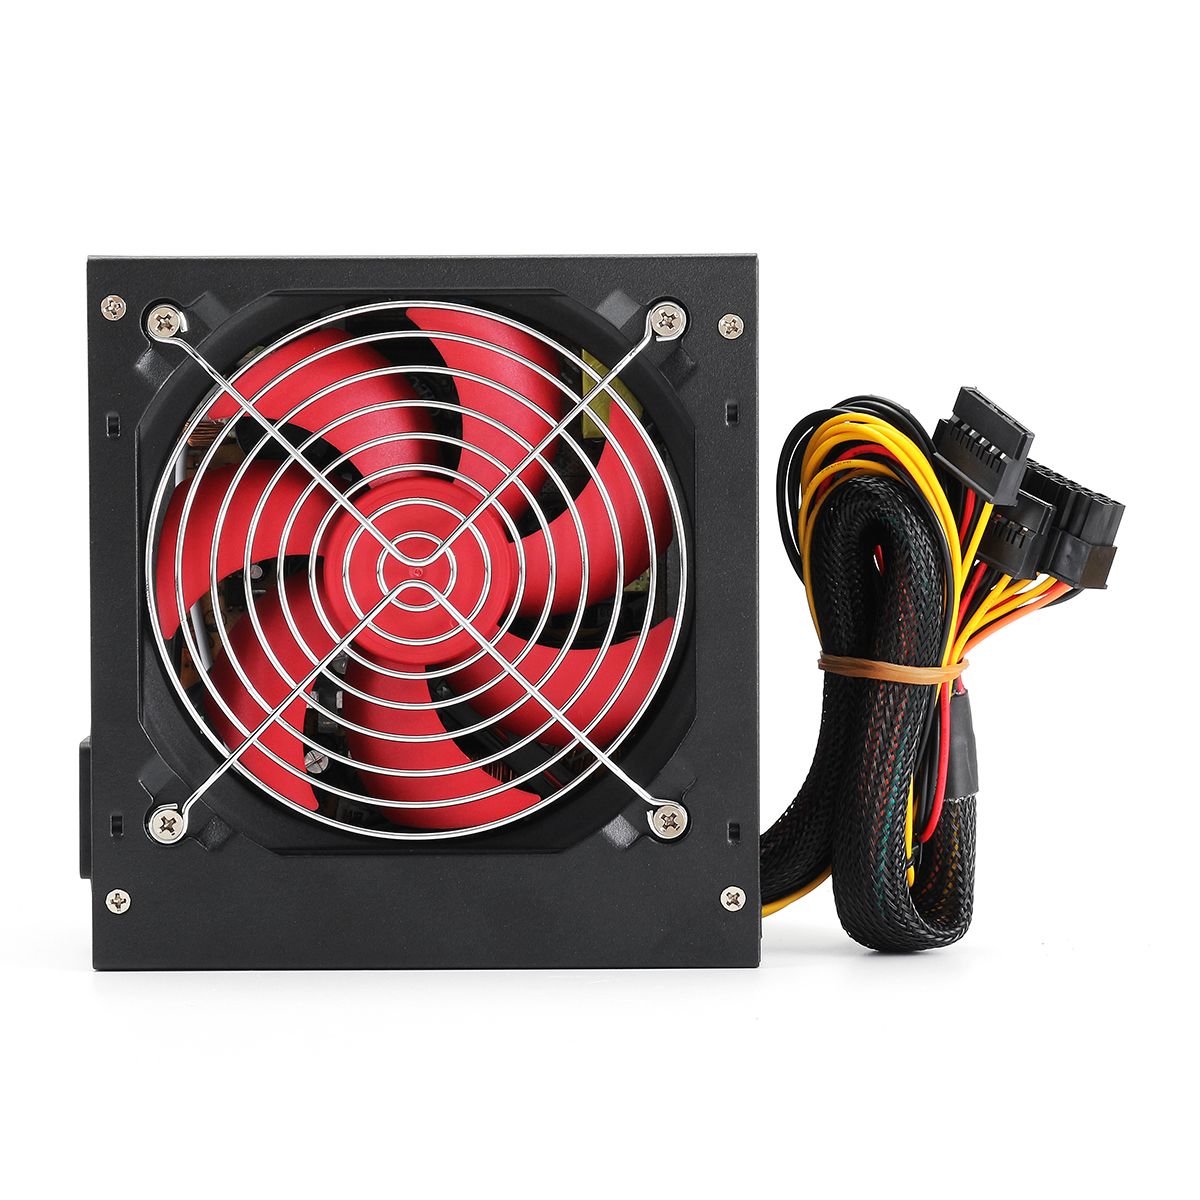 400W-BTC-Miner-Power-Supply-ATX-With-SATA-20PIN4PIN-Power-Supply-For-Mining-1686715